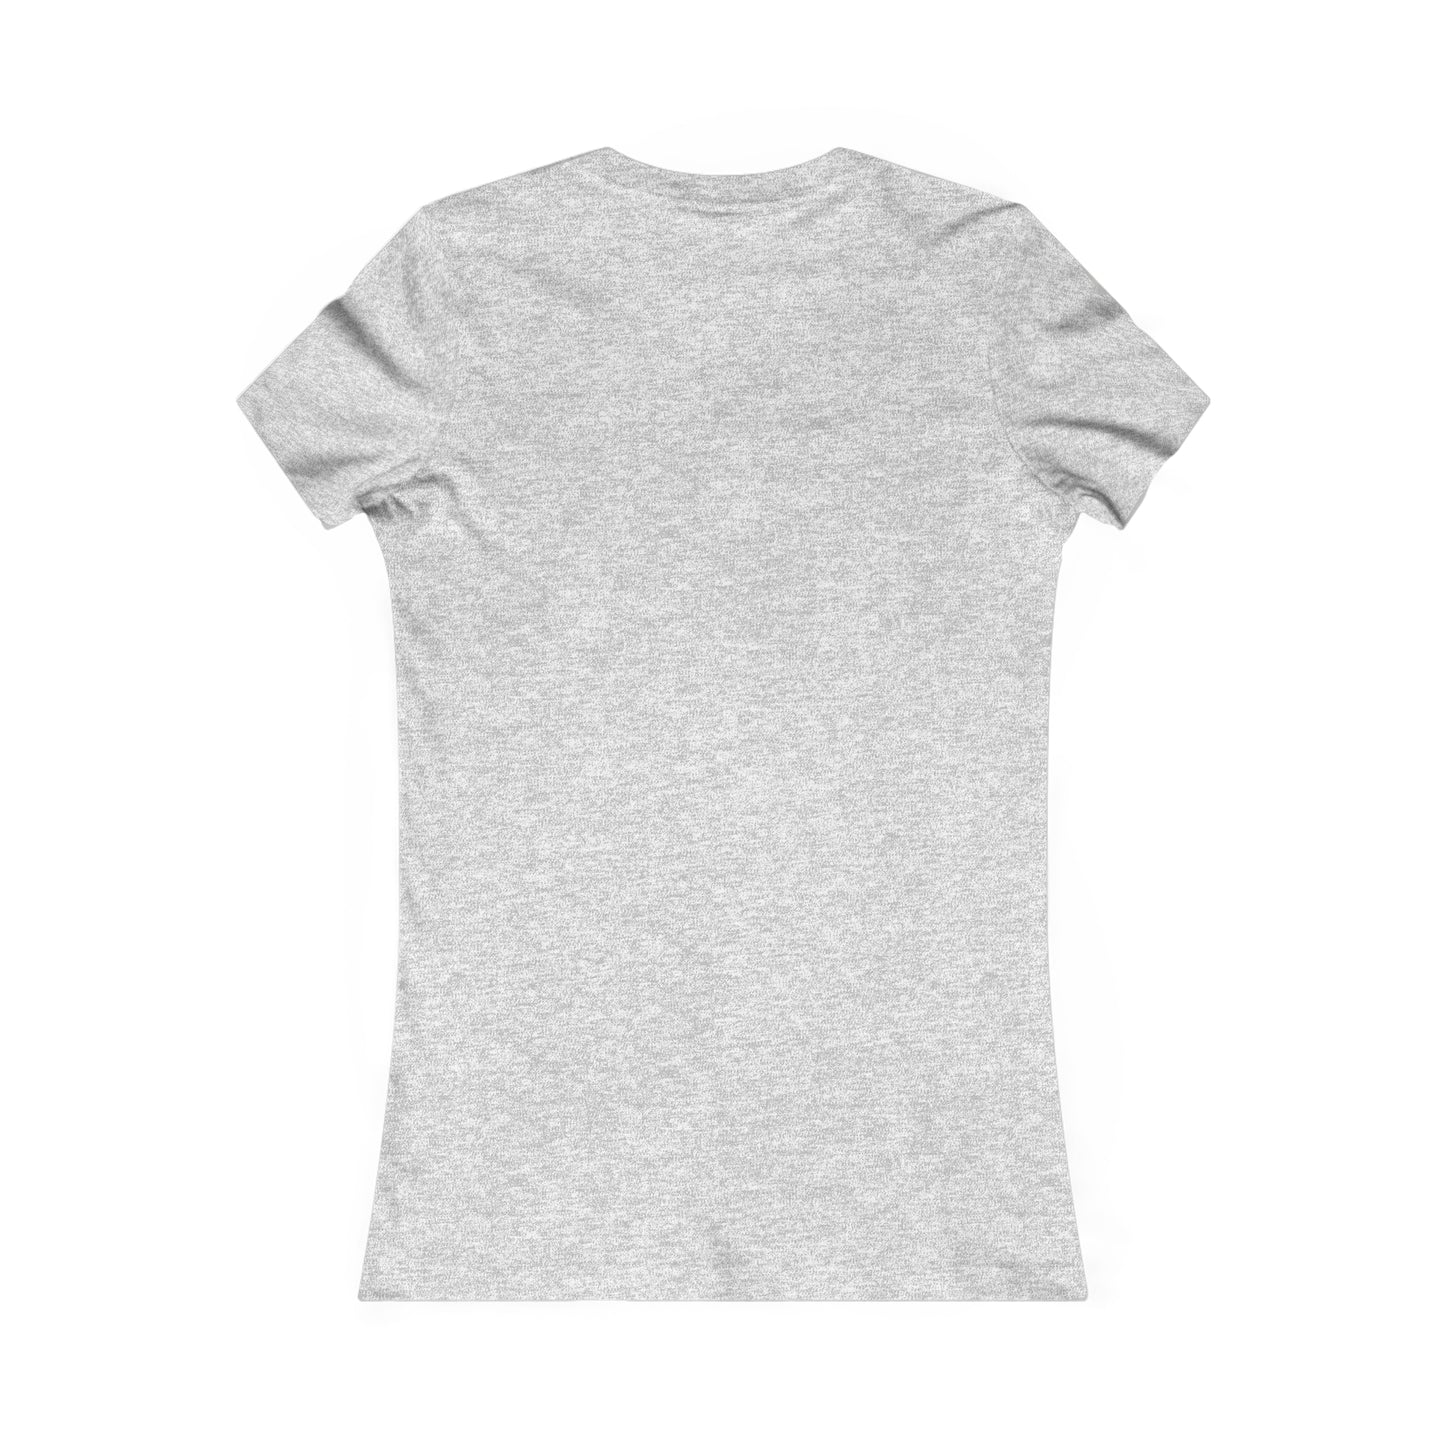 long Road To Justice Women's Favorite Tee